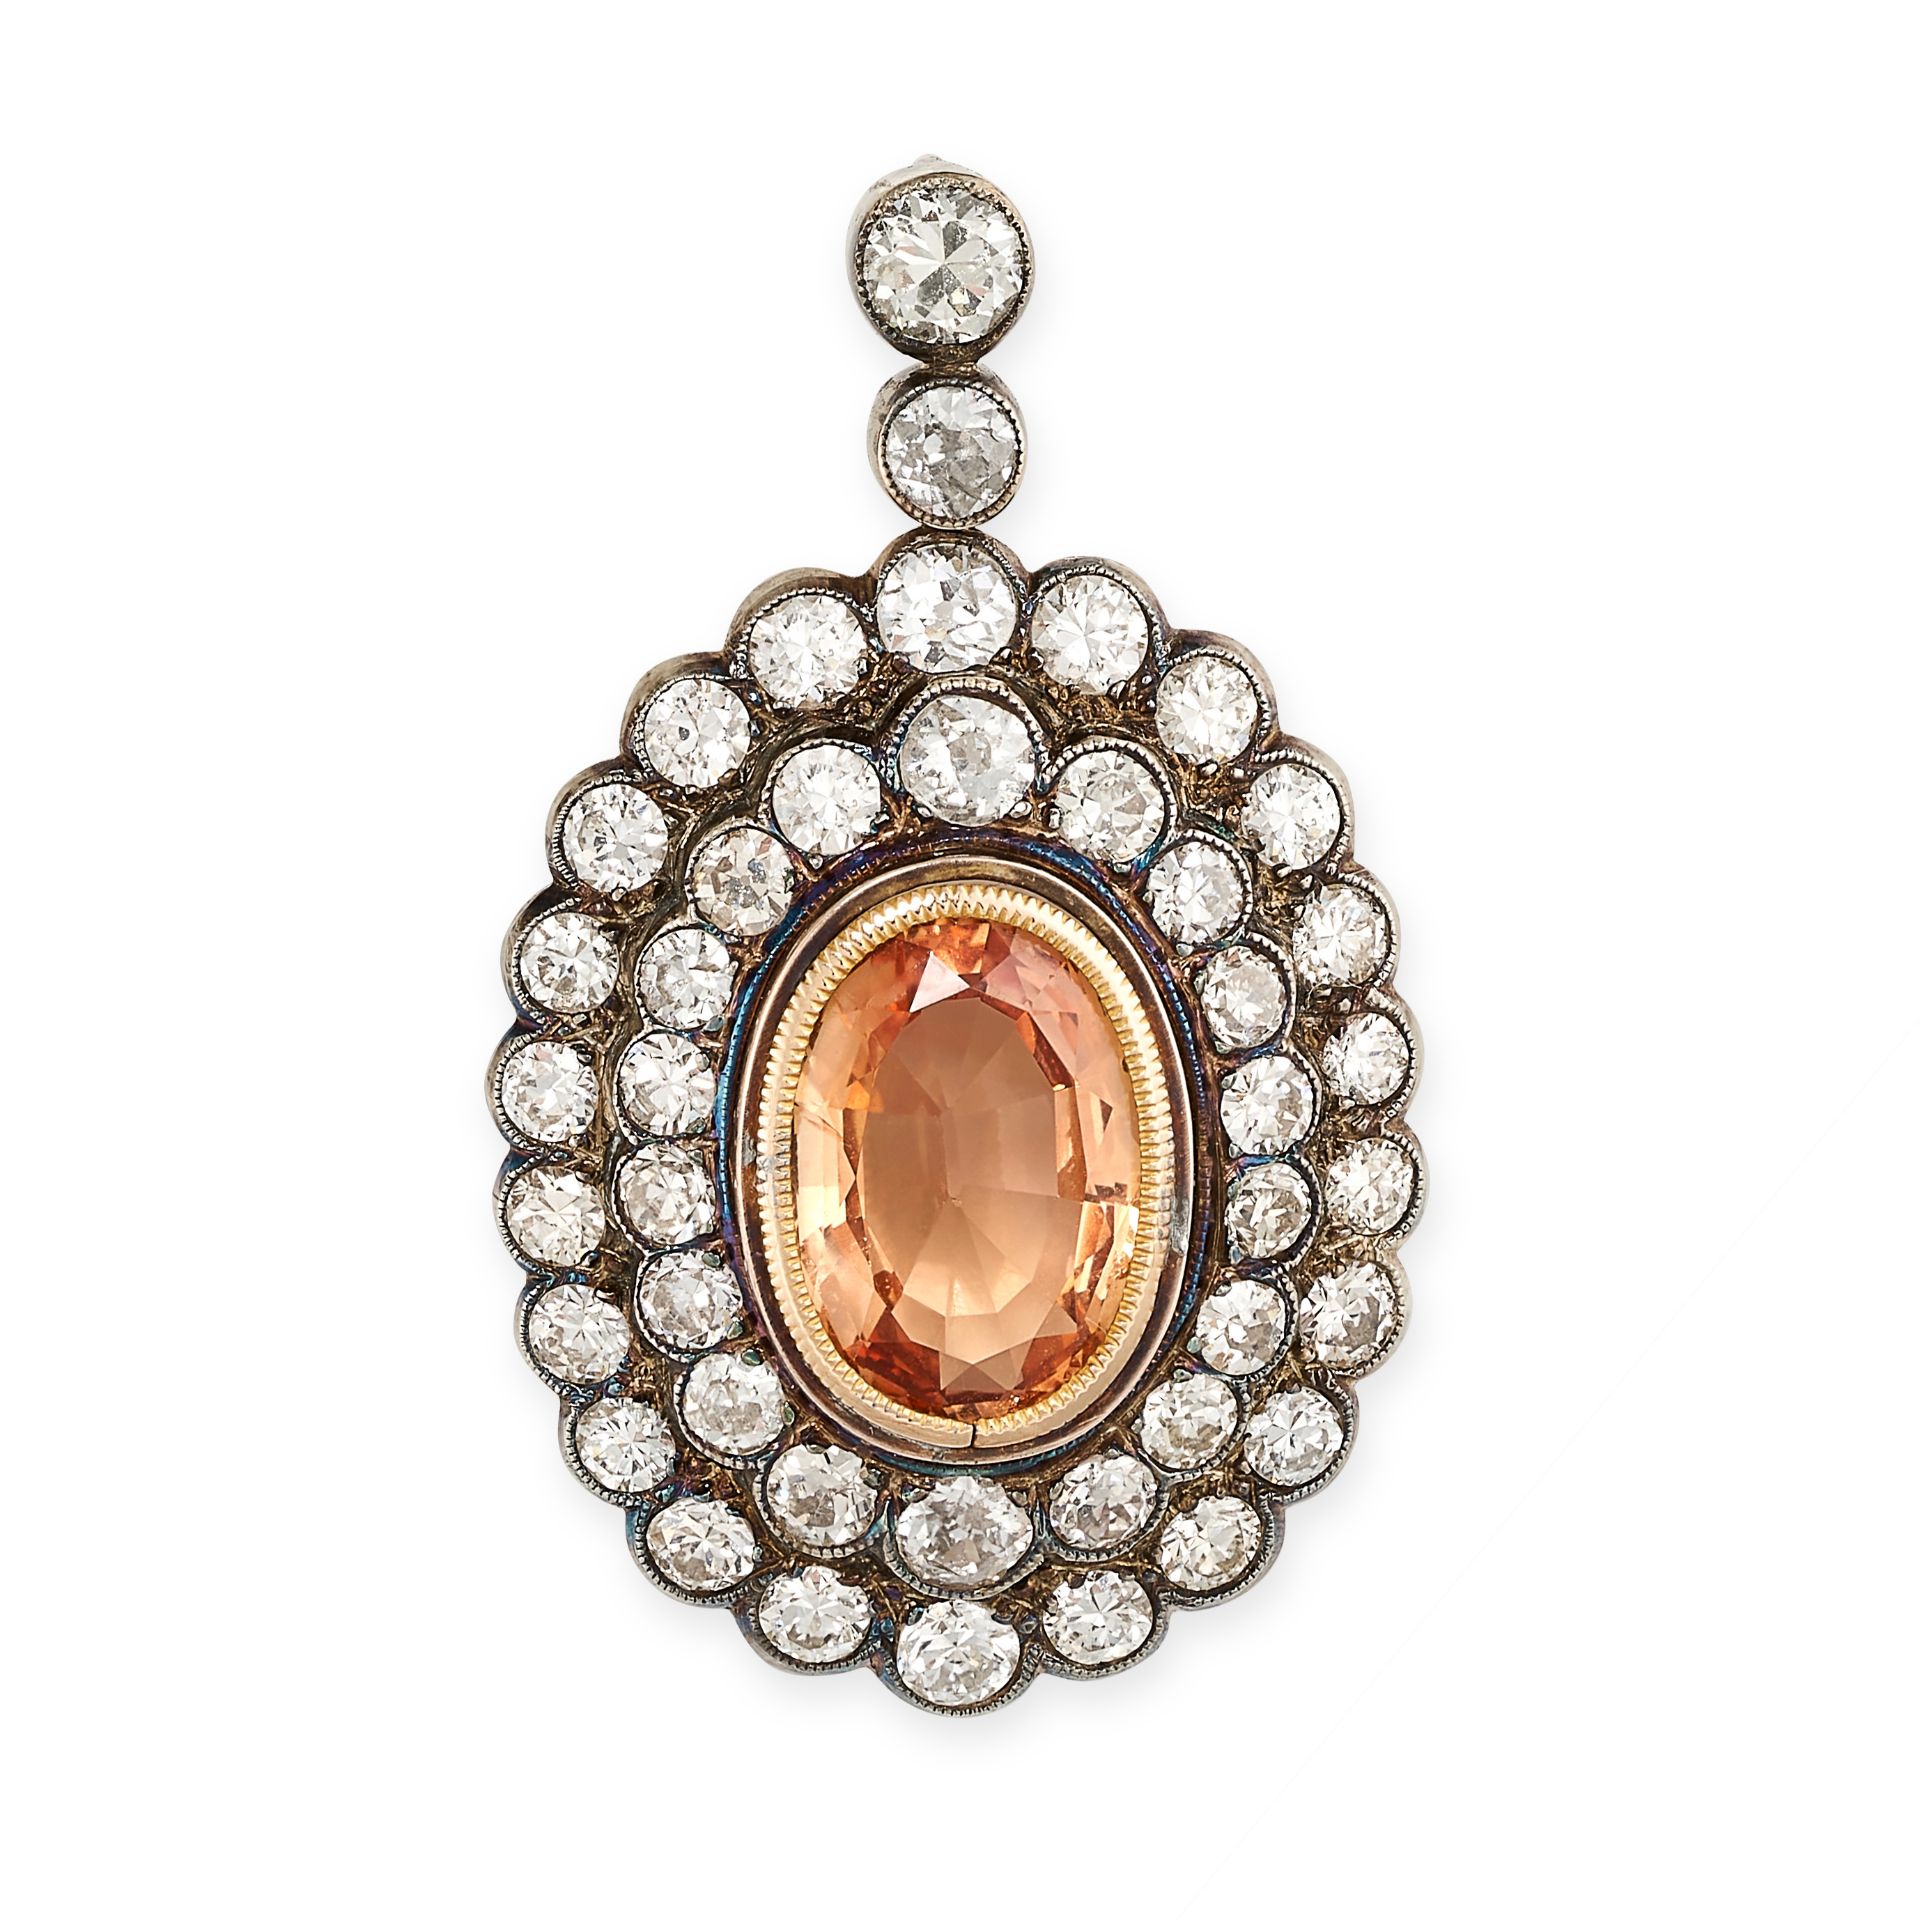 AN IMPERIAL TOPAZ AND DIAMOND OVAL CLUSTER PENDANT Millegrain borders Oval imperial topaz,